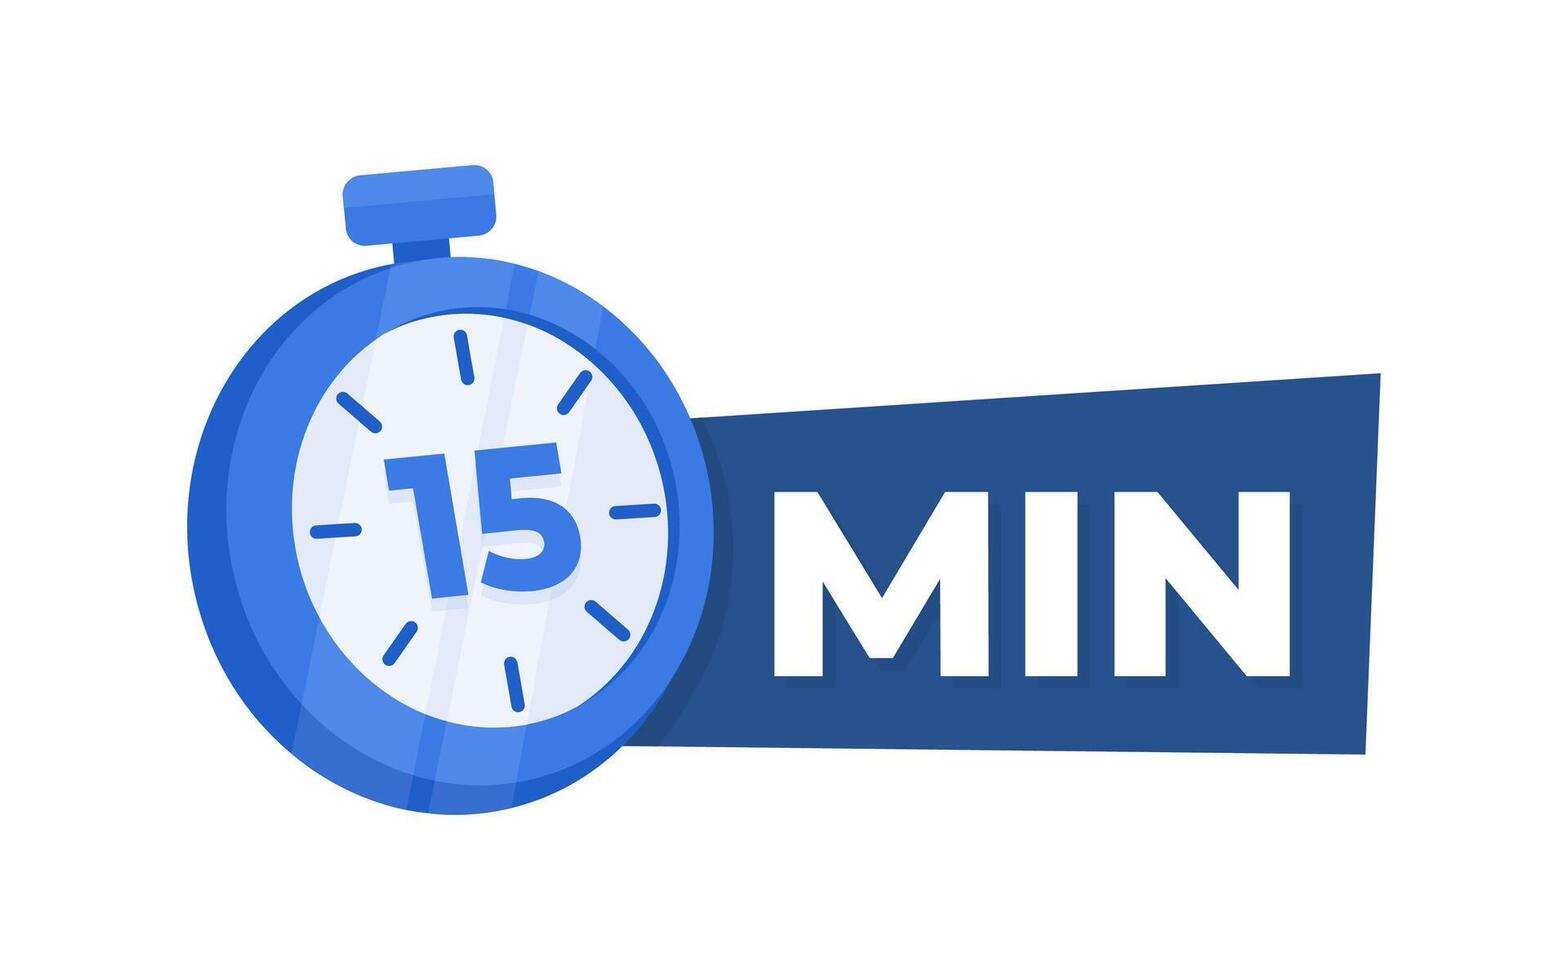 15 Minute Countdown Timer Icon Blue Stopwatch for Time Management and Productivity Concept vector